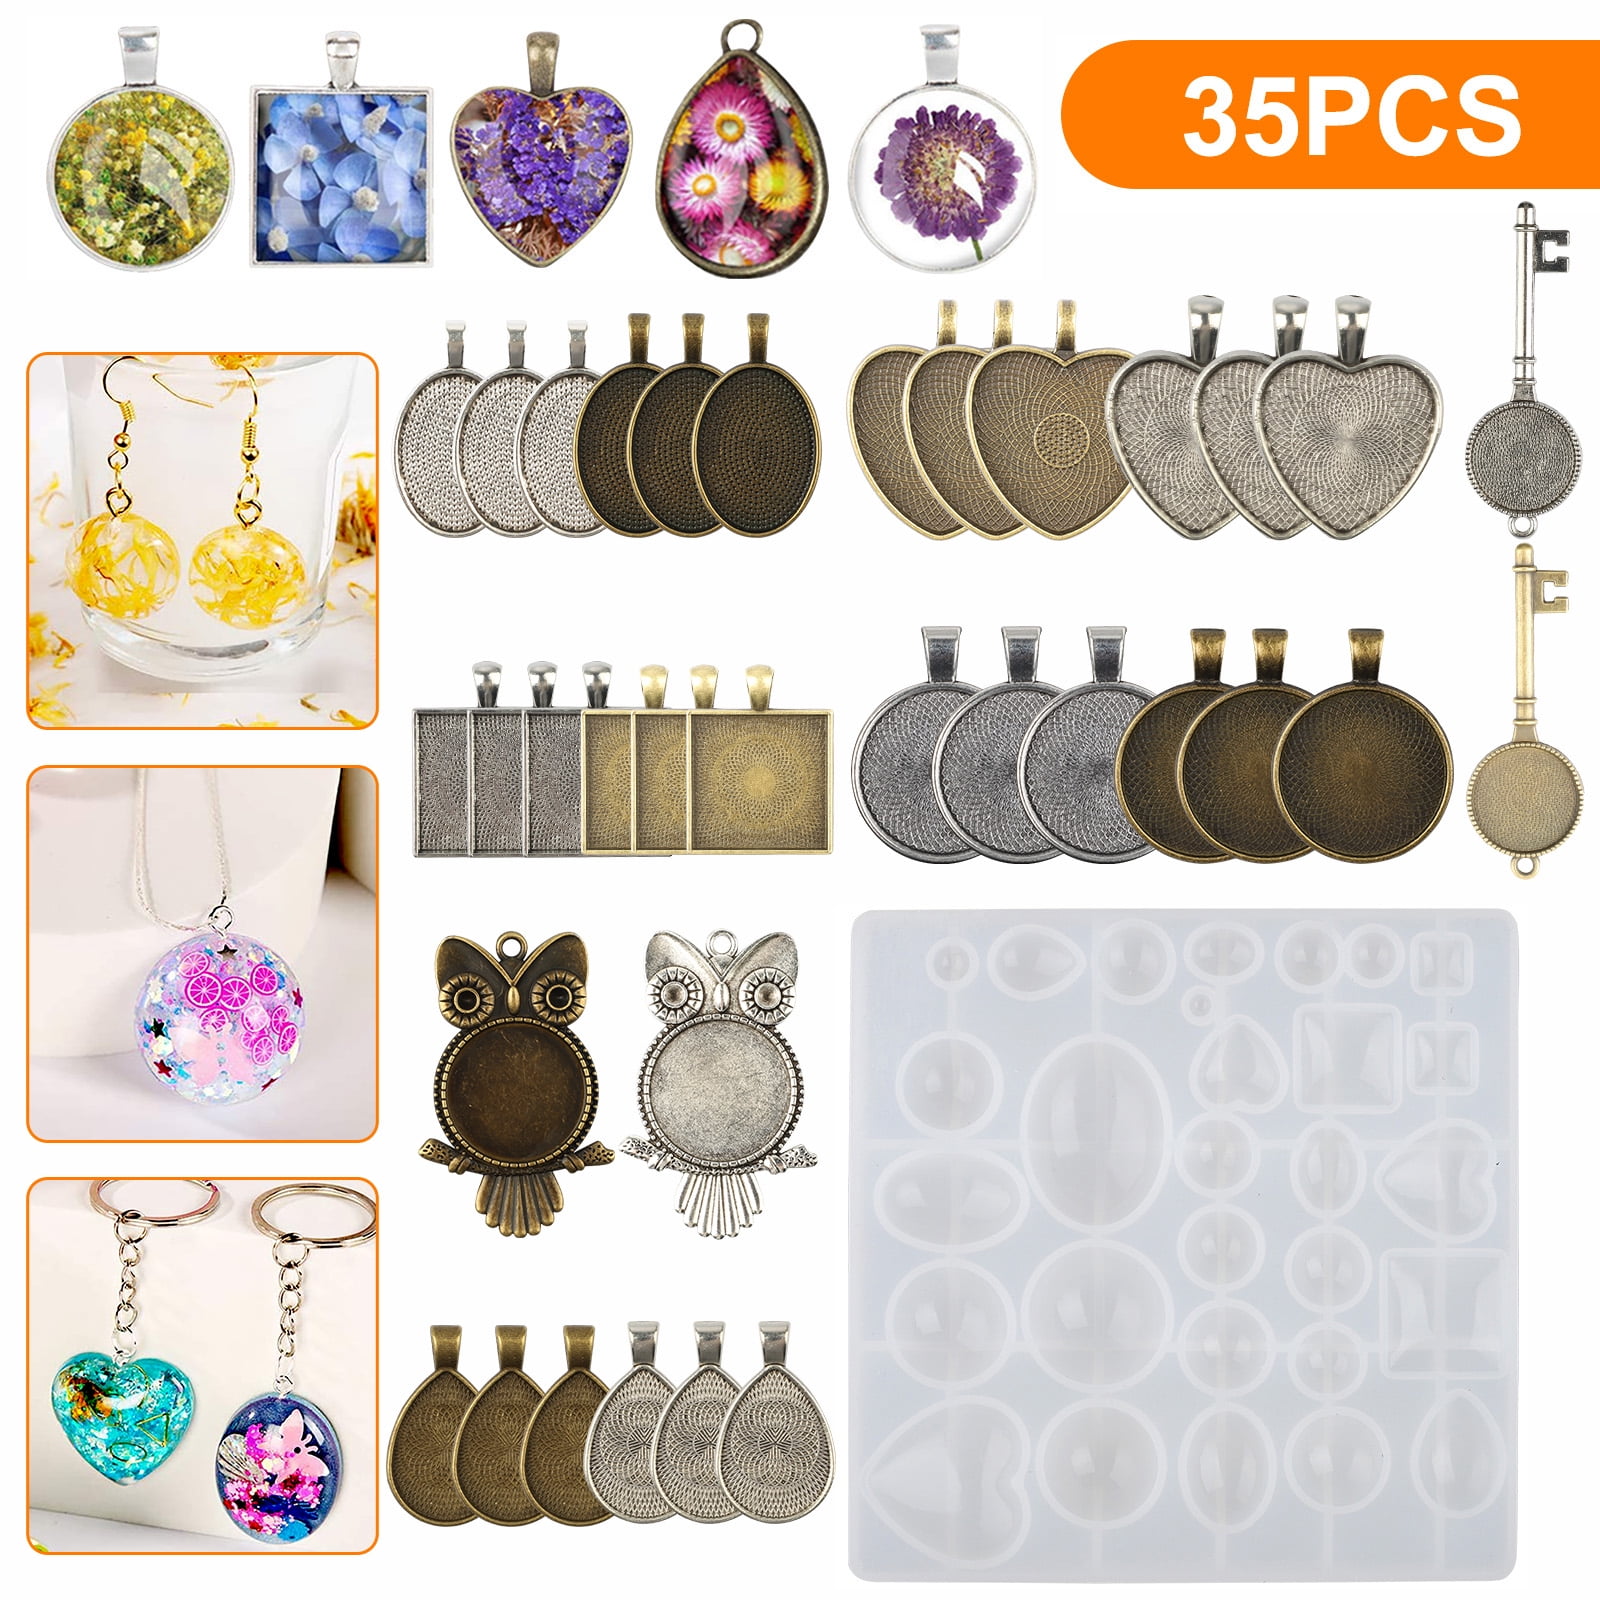 SkyAuks 31pcs Resin Jewelry Molds, Jewelry Casting Molds, Pendant Trays Making Kit, Silicone Molds for DIY Resin Pendants, Keychains, Earrings, Resin